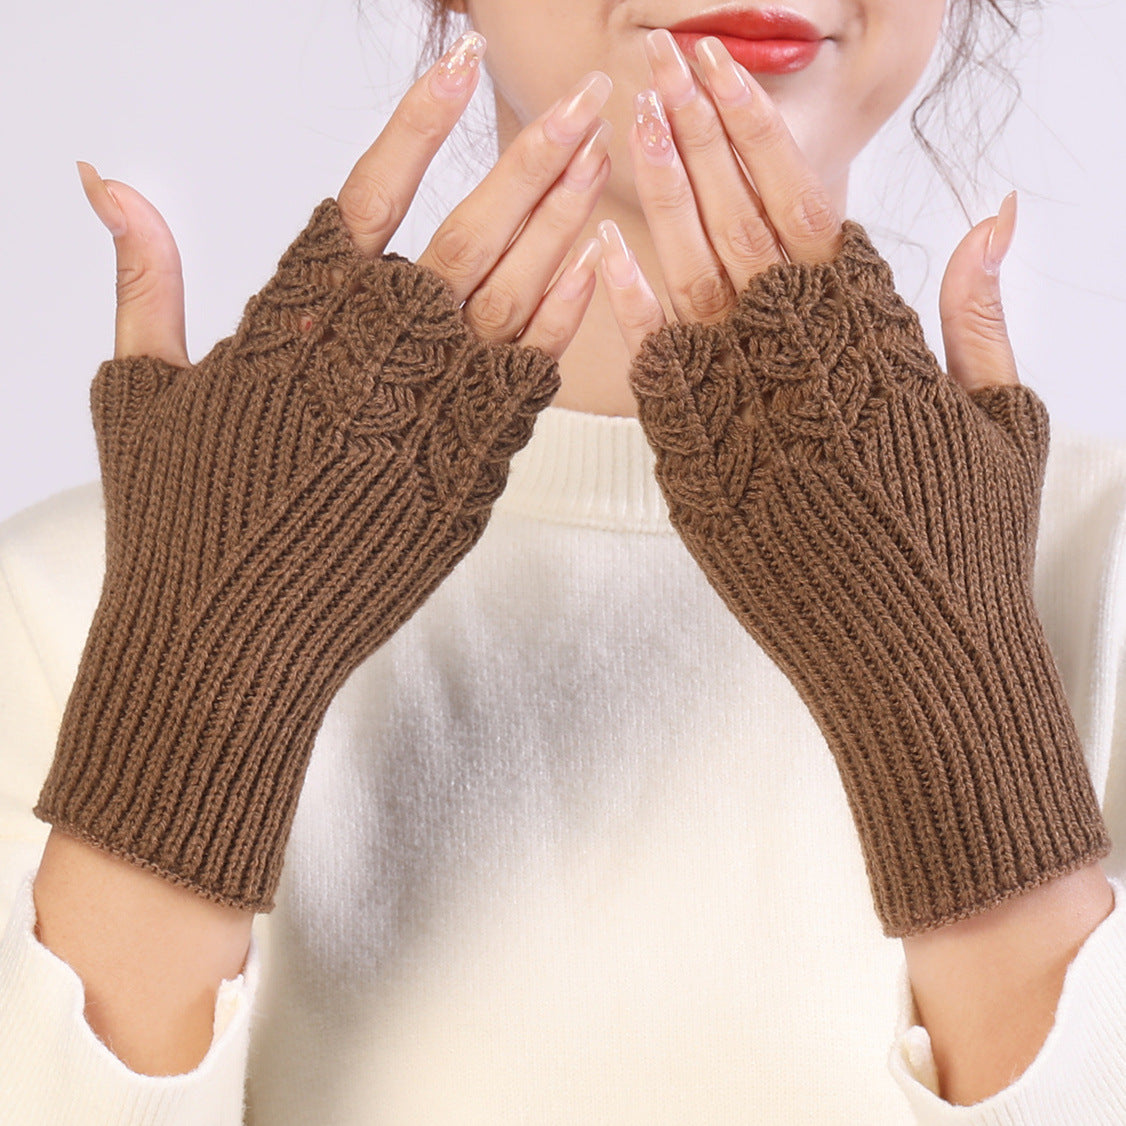 Autumn And Winter New Female Students Fashion All-match Knitted Warm Half-fingerless Gloves